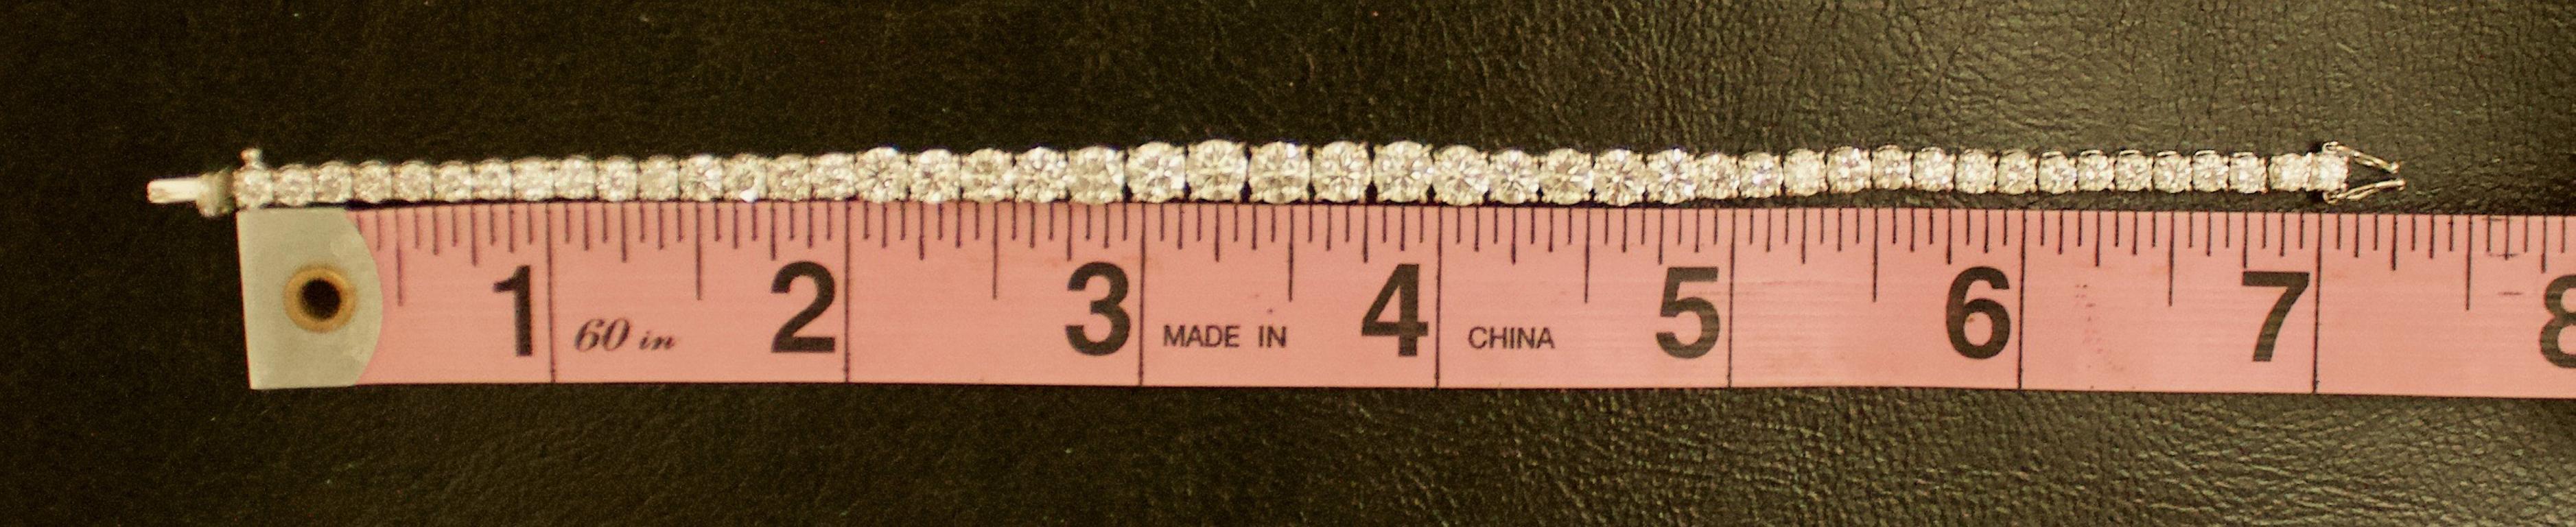 Tapered Diamond Tennis Bracelet in 18k White Gold 9.75 Carats For Sale 9